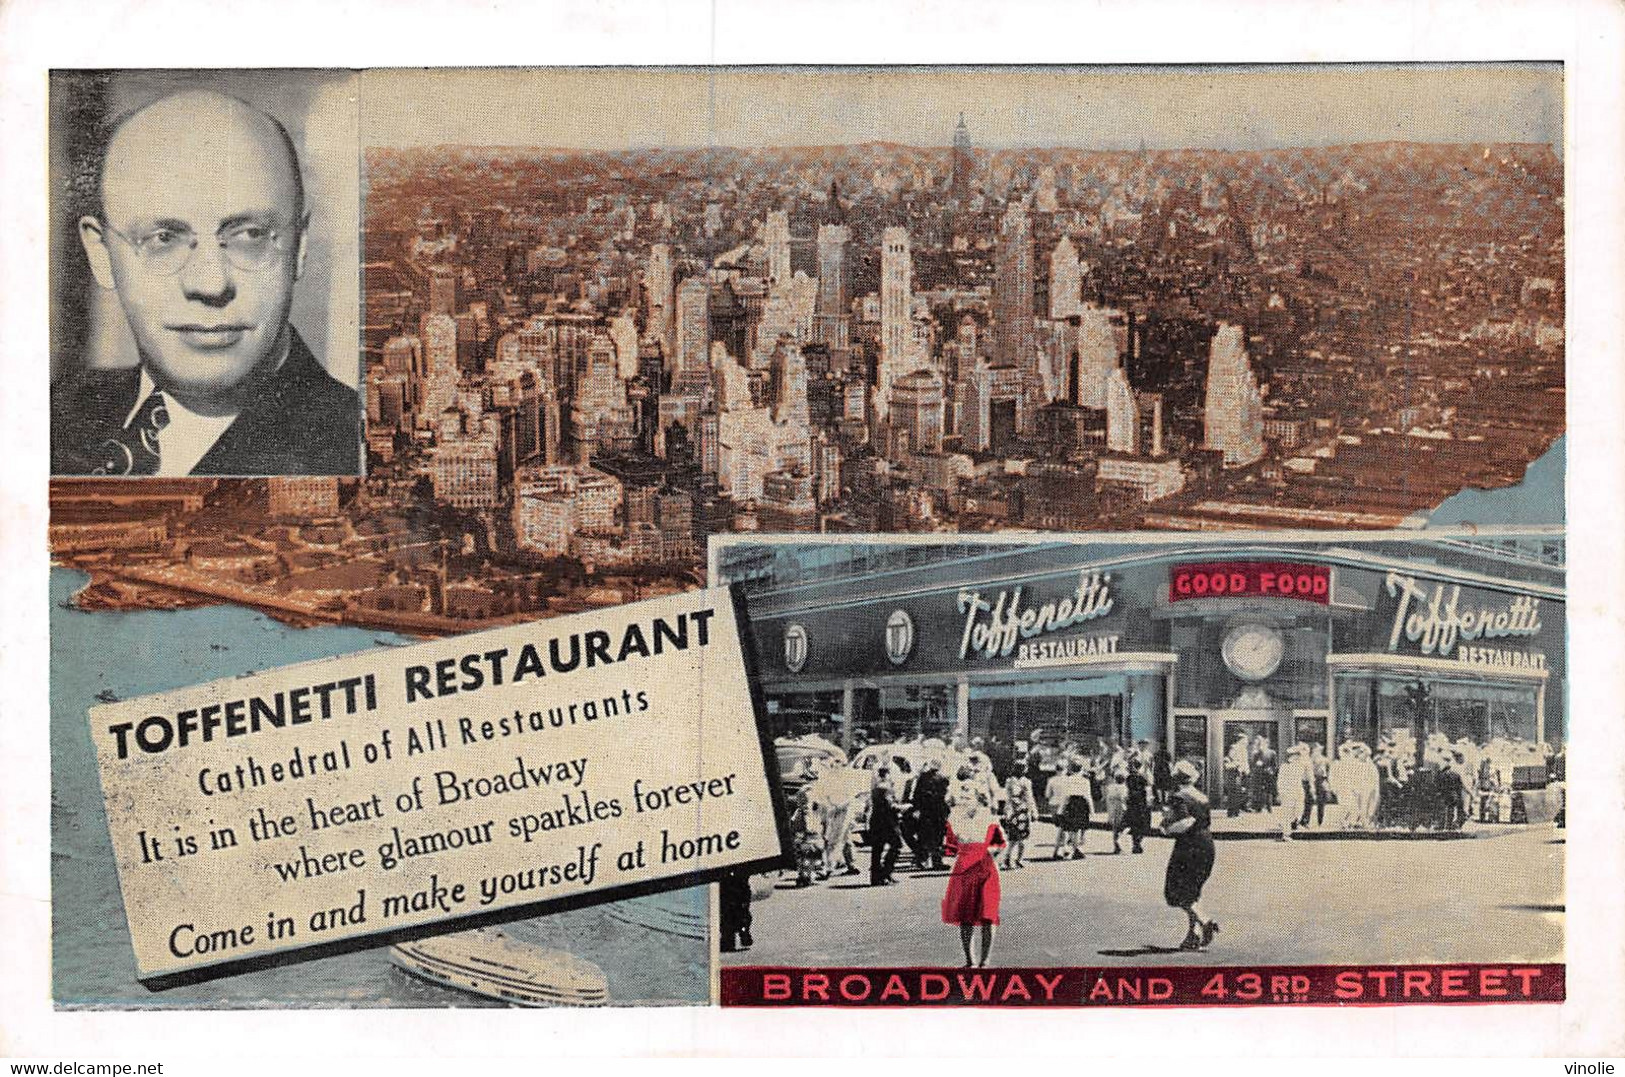 21-7145 : NEW-YORK CITY. TOFFENETTI RESTAURANT 43 Rd STREET AT BROADWAY ON TIMES QUARE - Broadway